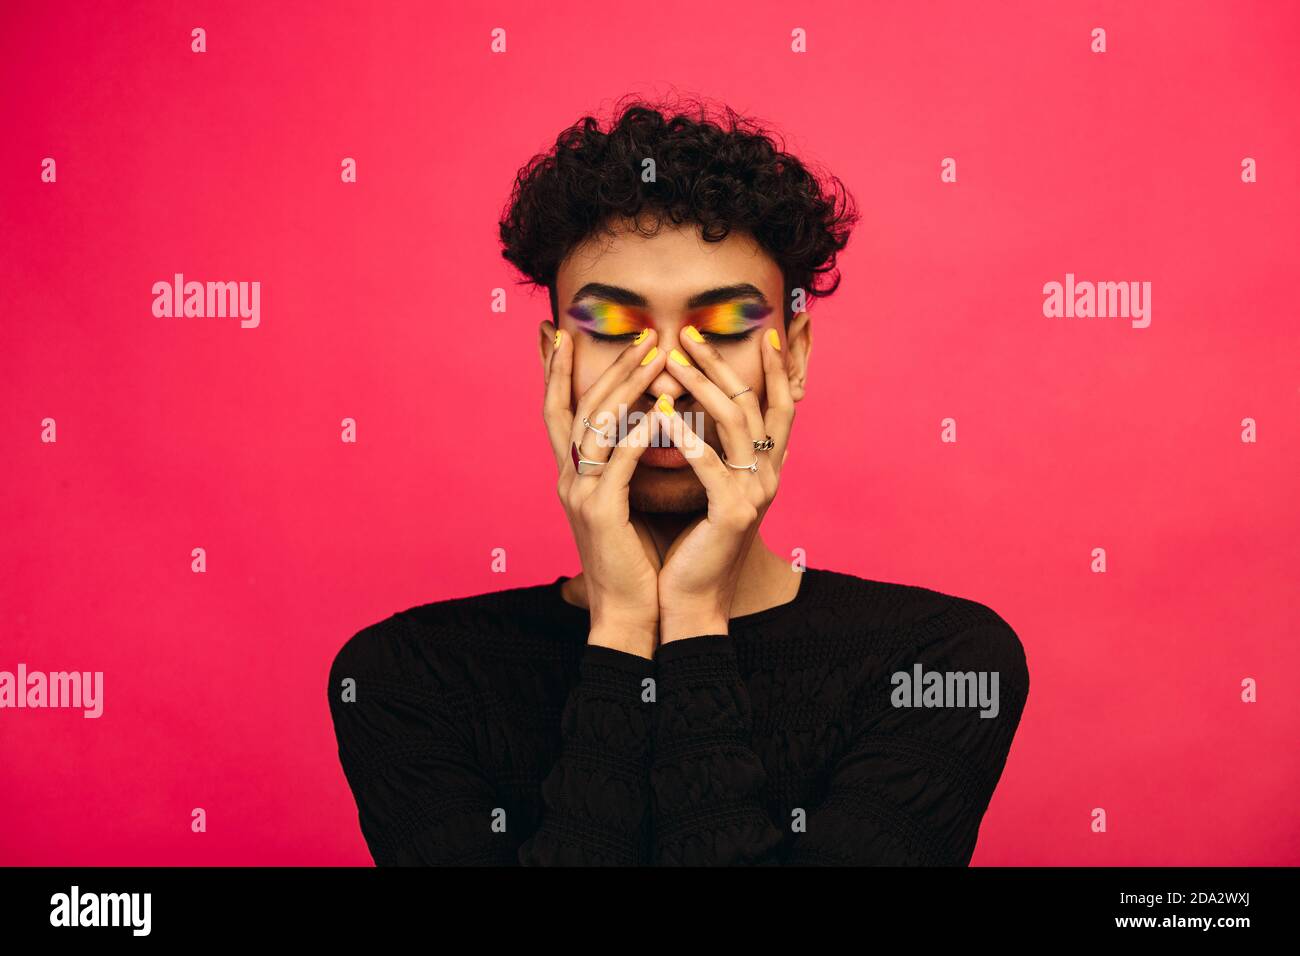 Gay man wearing rainbow colored eye shadow. Androgynous male holding his face with eyes closed on red background. Stock Photo